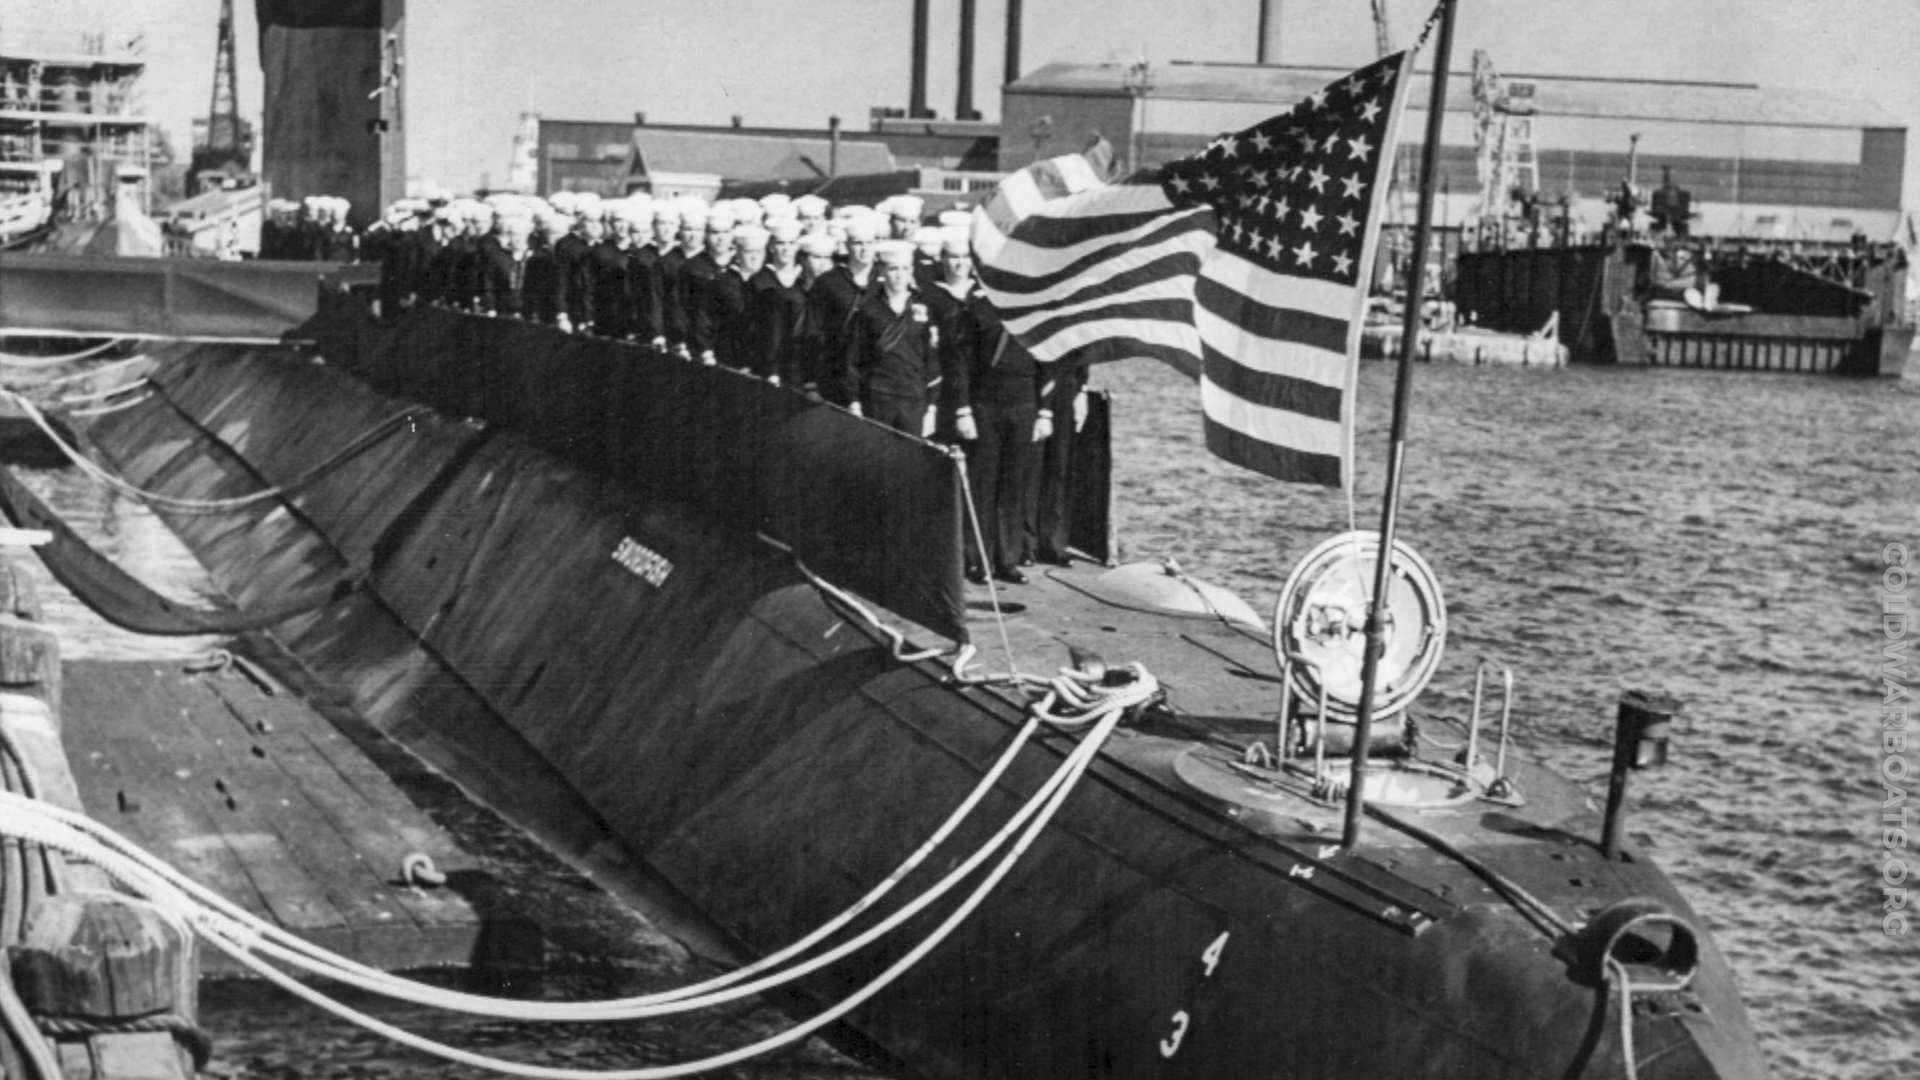 The ship's company topside on the USS SWORDFISH (SSN 579) during commissioning ceremonies at Portsmouth Naval Shipyard, 15 SEP 1958.